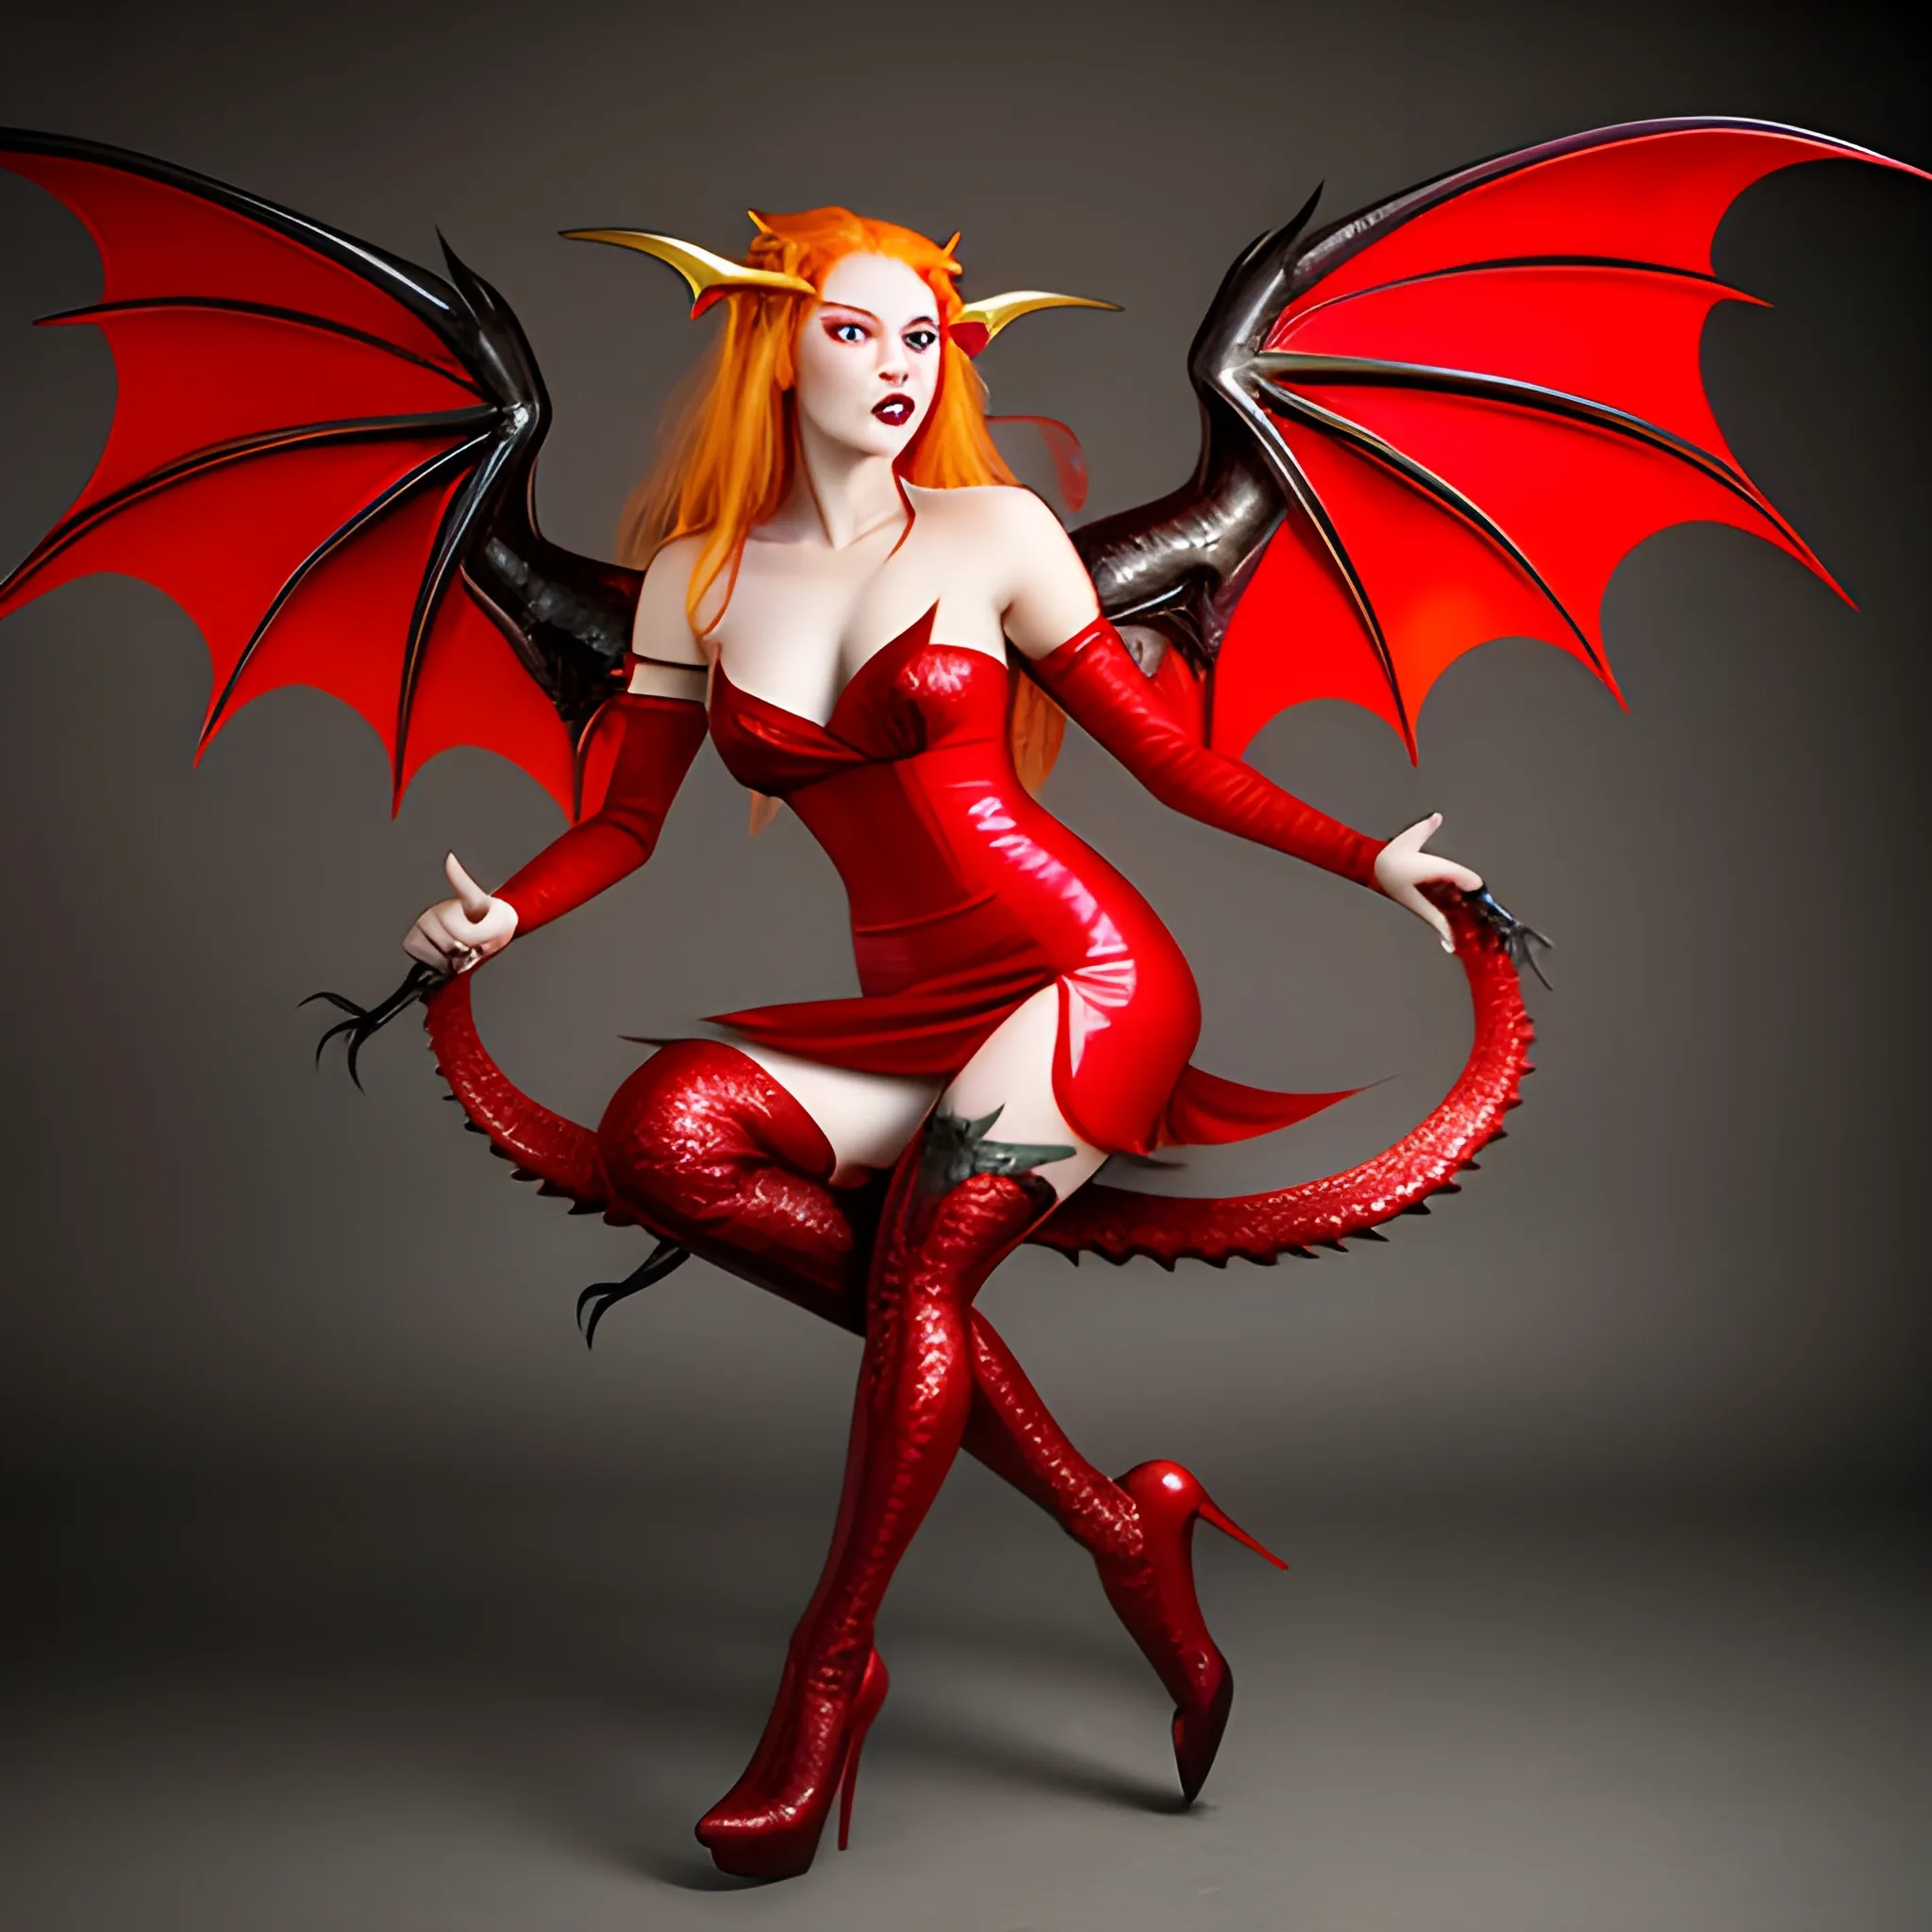 Photo of beautiful dragon-woman. Red dress. Green eyes, golden hair, green wings, black stockings, red high heeled shoes, sharp teeth, clawed hands, majestic, terrible, scary, eating noodles